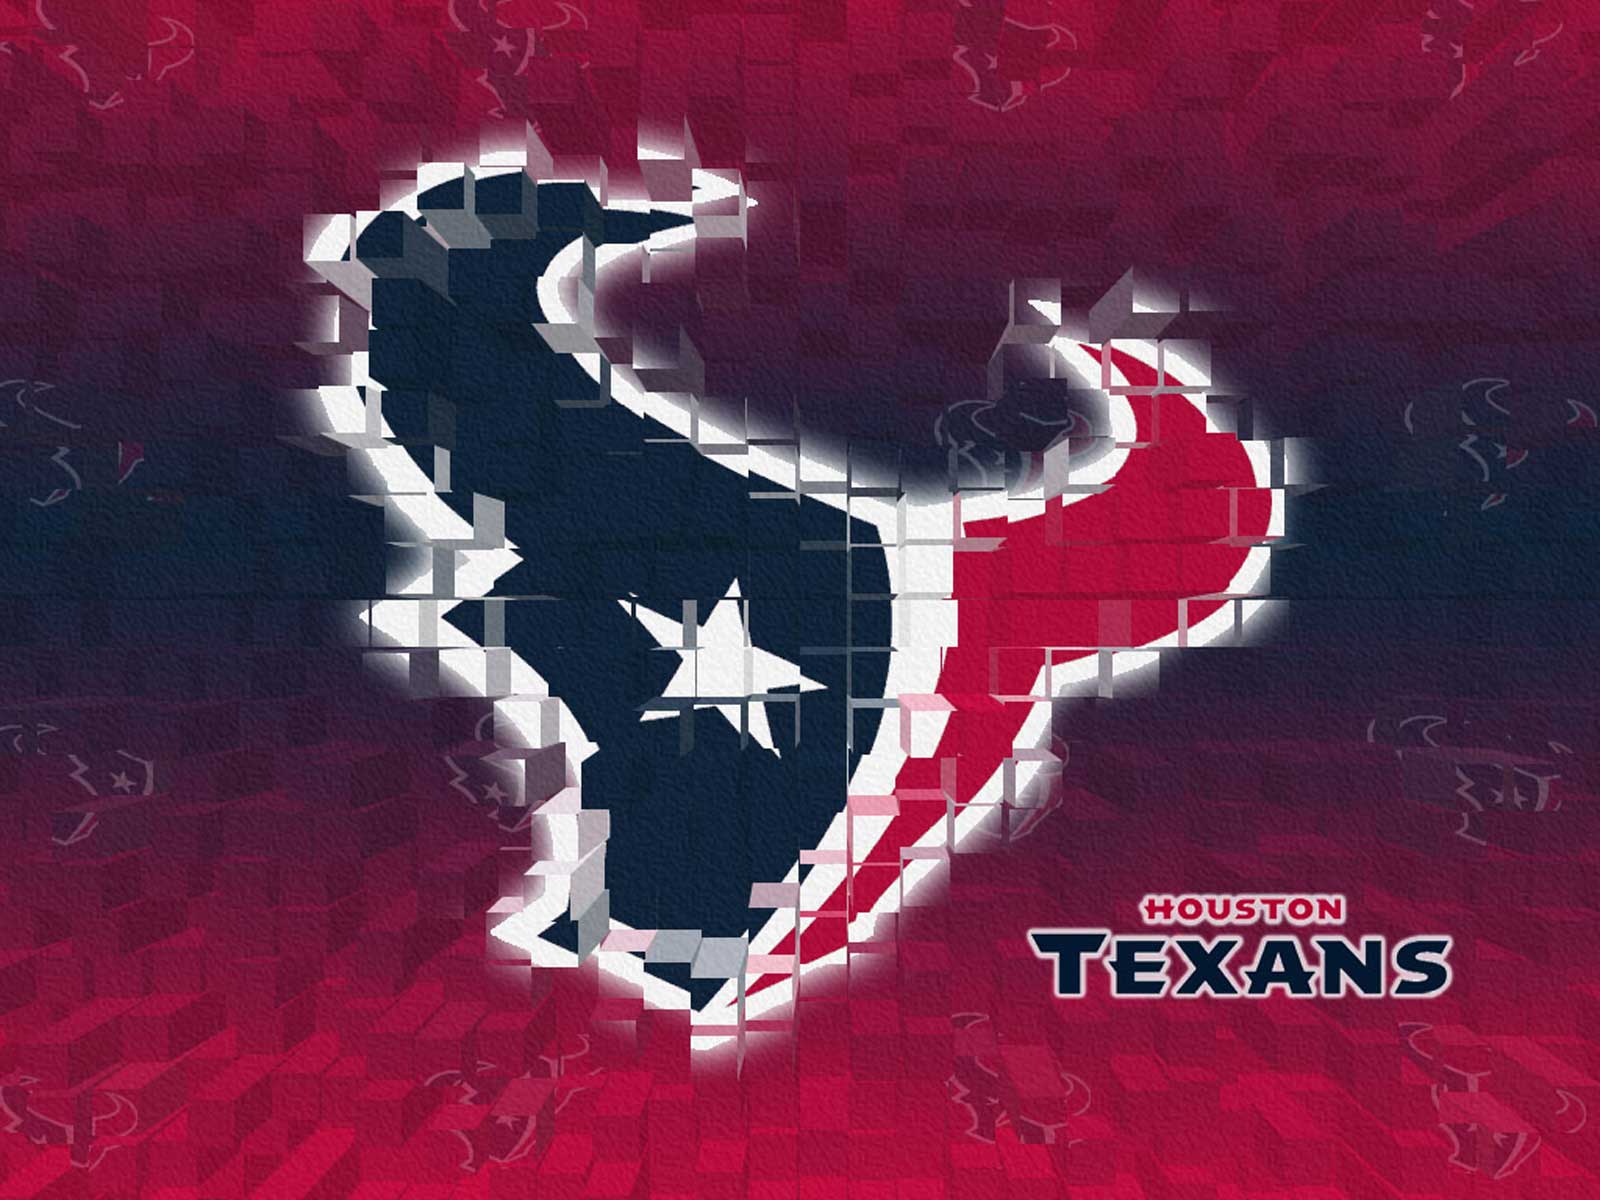 Houston Texans Wallpapers Archives